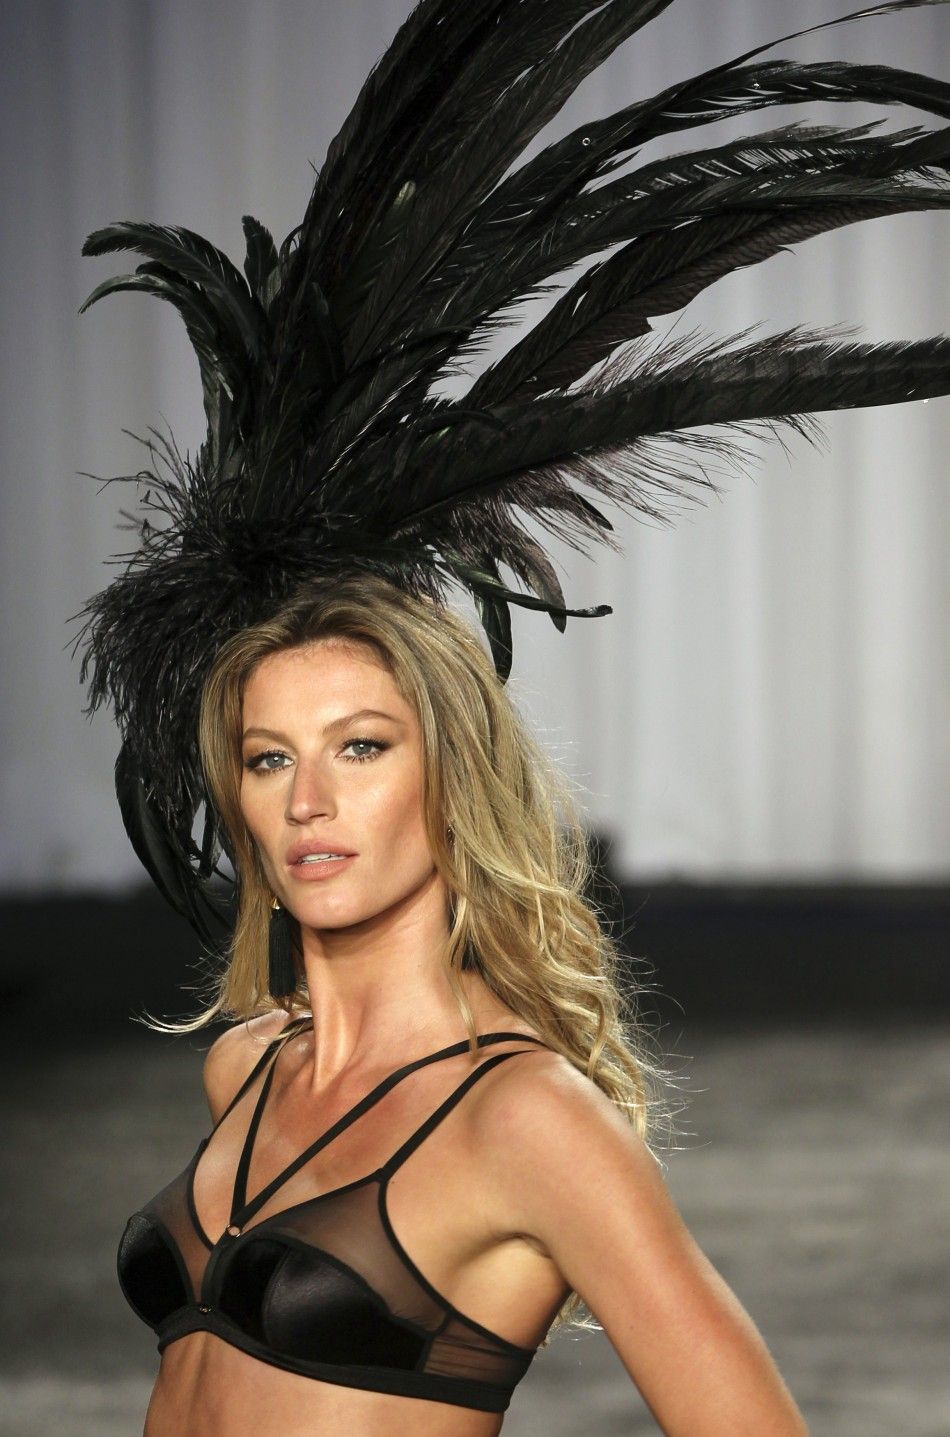 Brazilian supermodel Gisele Bundchen displays a creation from the quotGisele Bundchen Intimatequot collection by Hope Lingerie in Sao Paulo